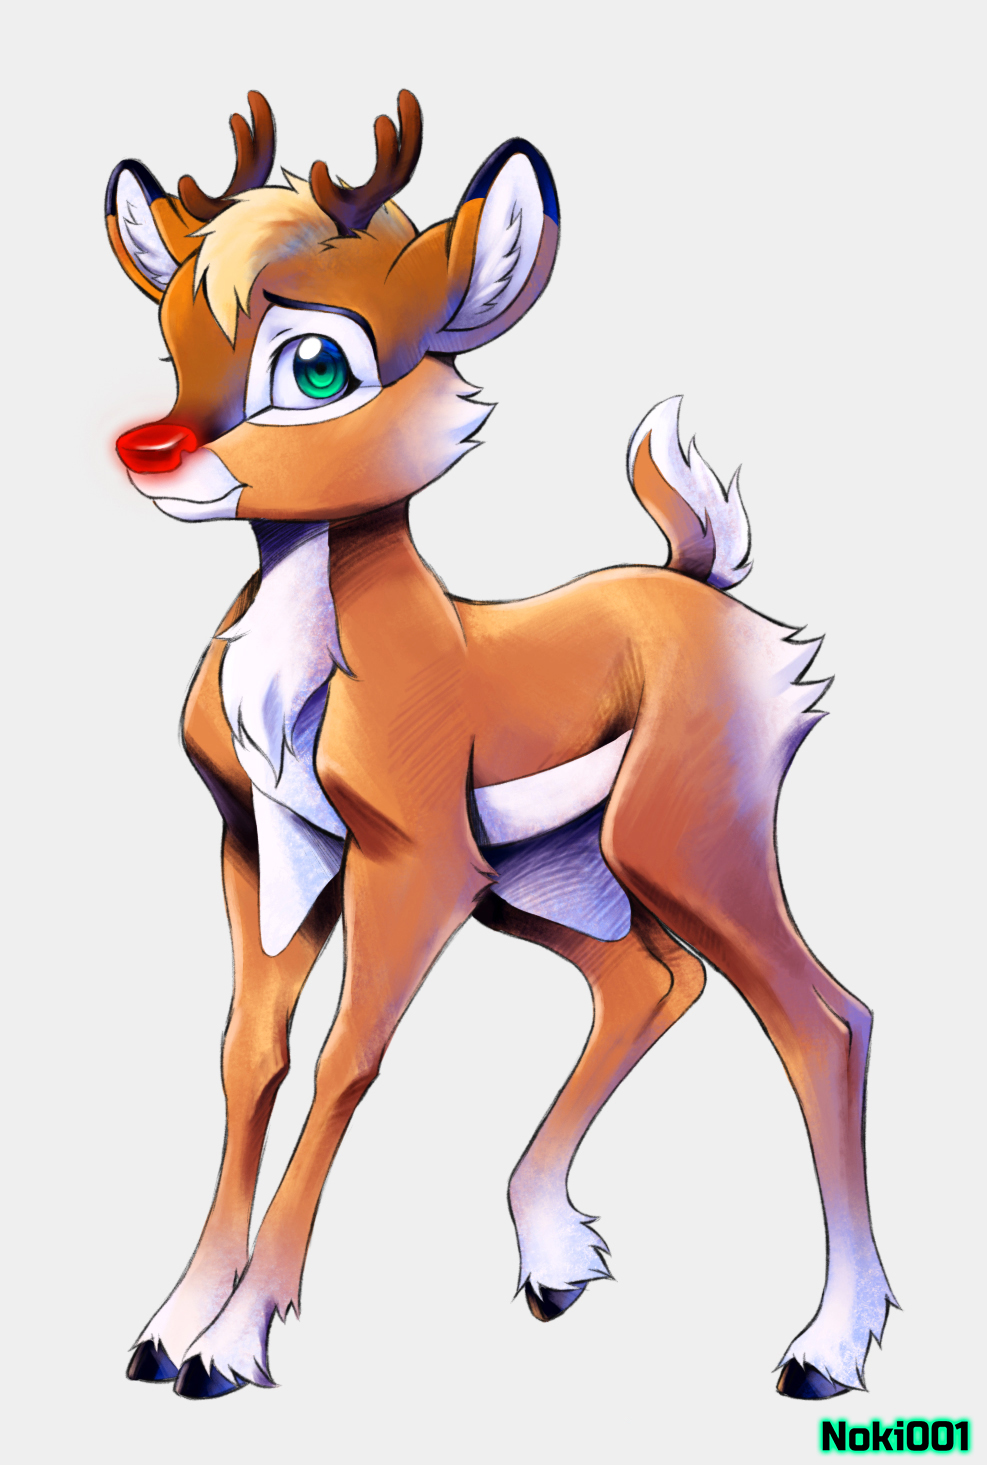 Rudolph the Red-Nosed Reindeer by Noki001 on DeviantArt